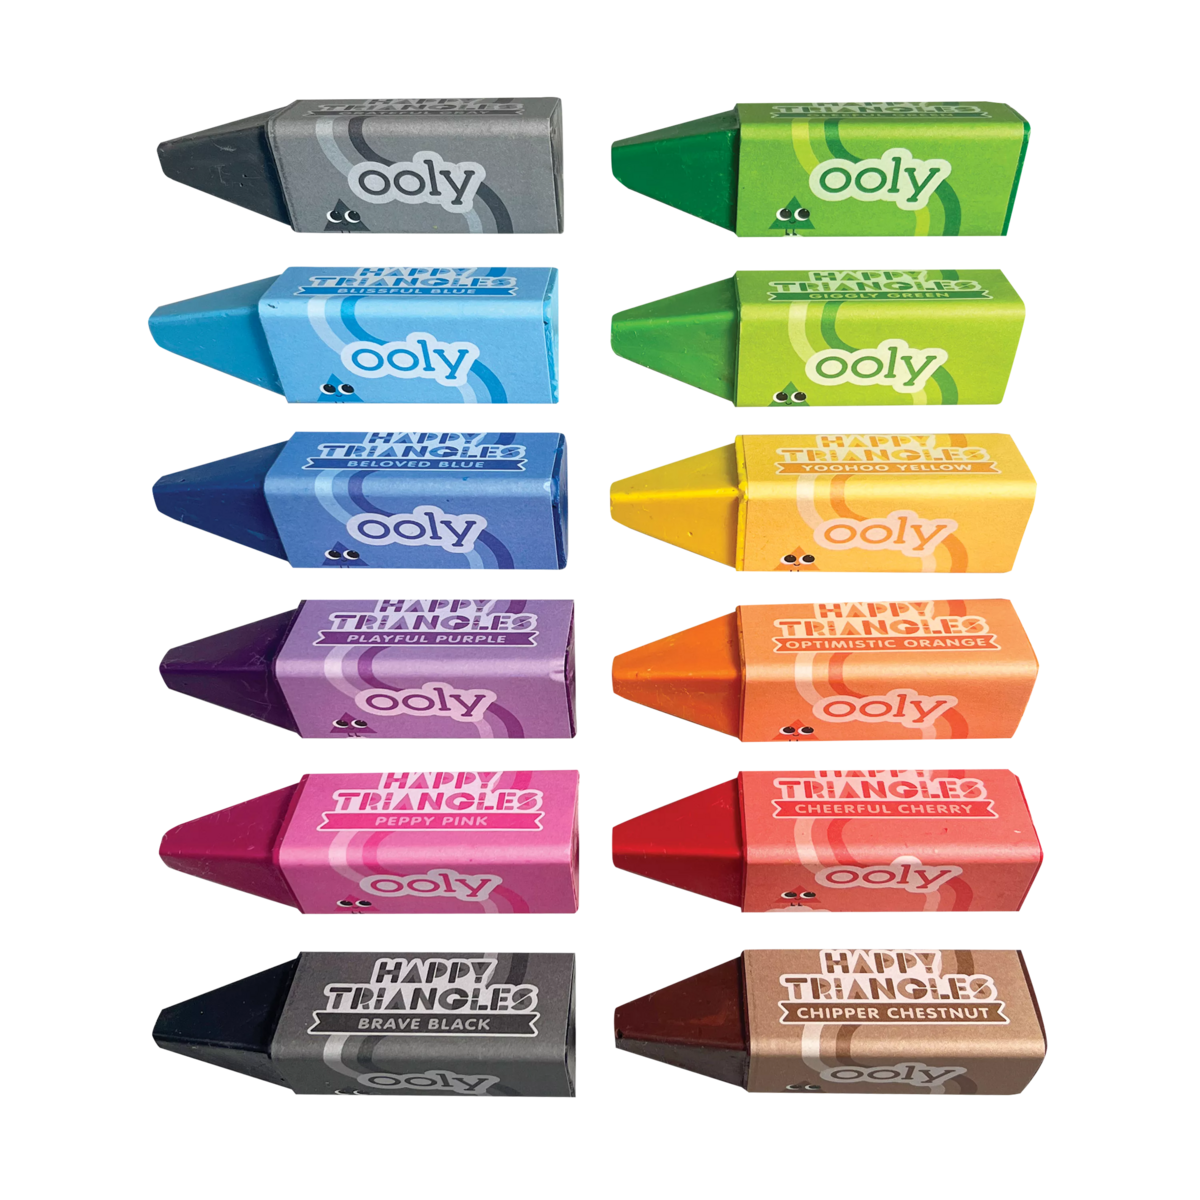 Happy *new* release Friday! Crayon Box Cadmium is available now at